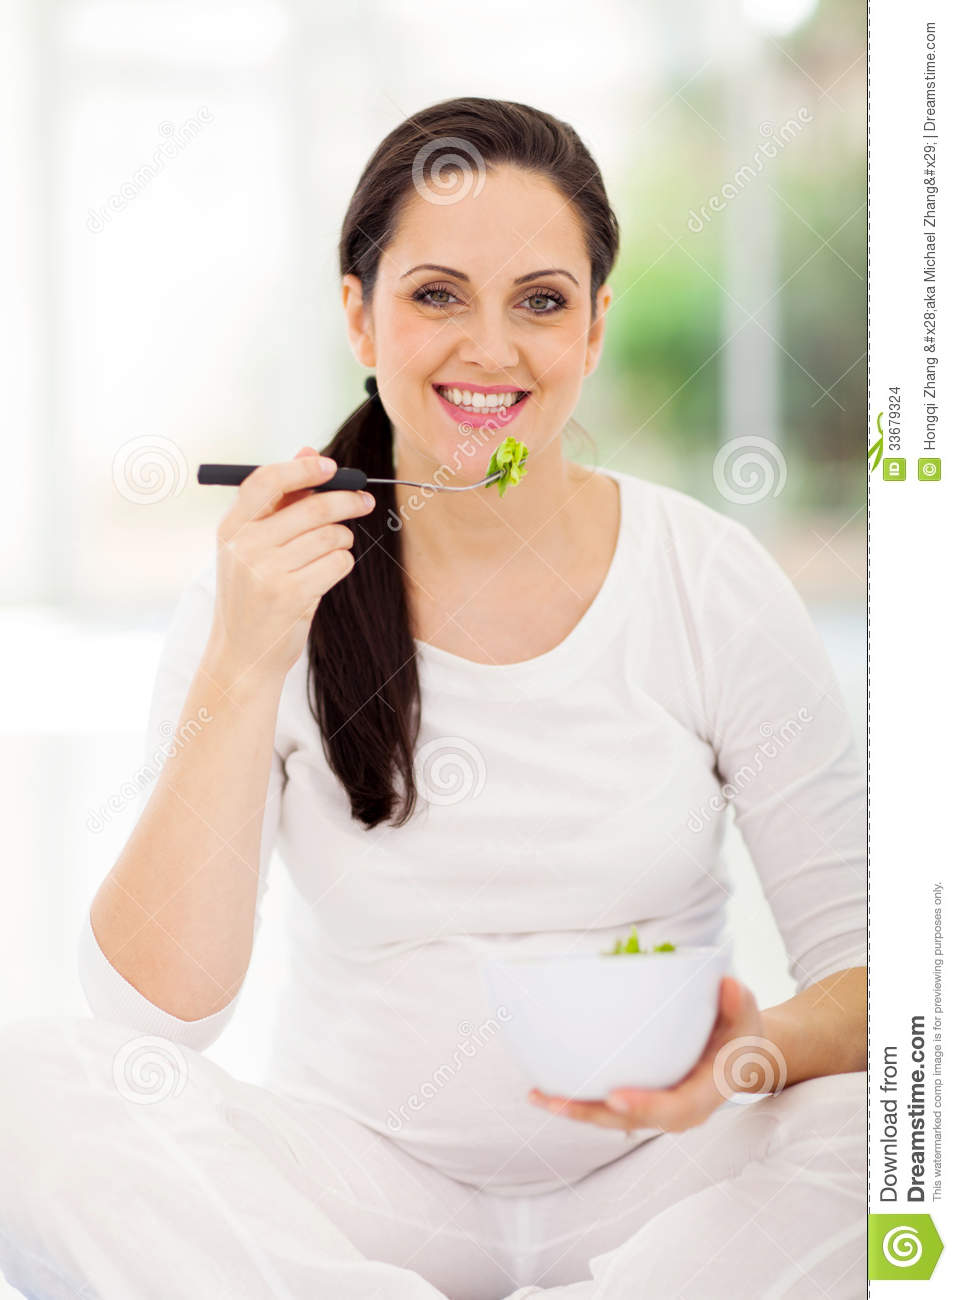 Pregnant Woman Eating Stock Images   Image  33679324